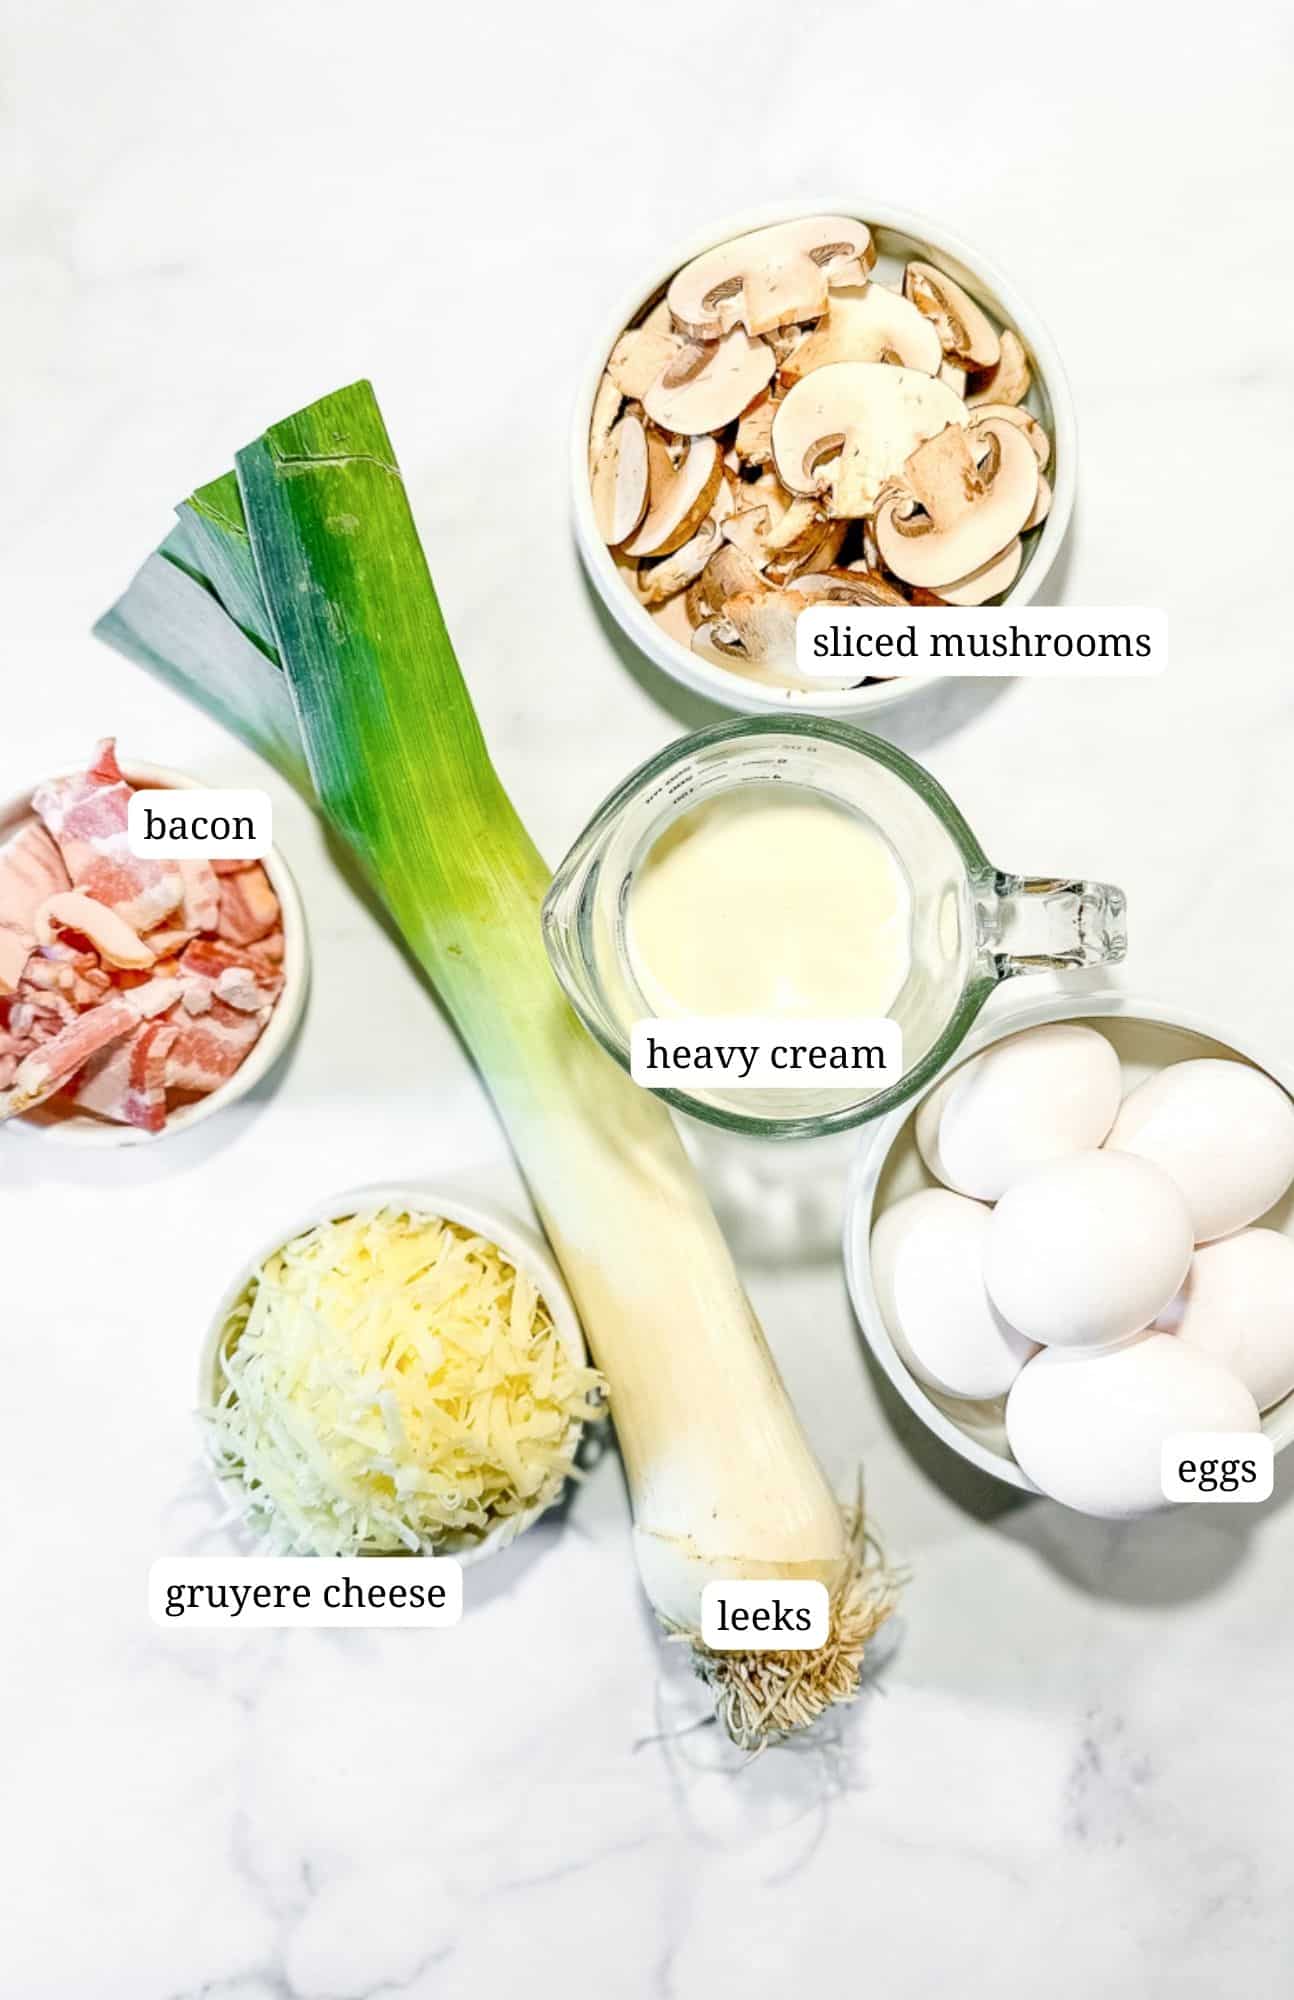 Ingredients for sheet pan frittata with mushrooms, bacon, and leeks.